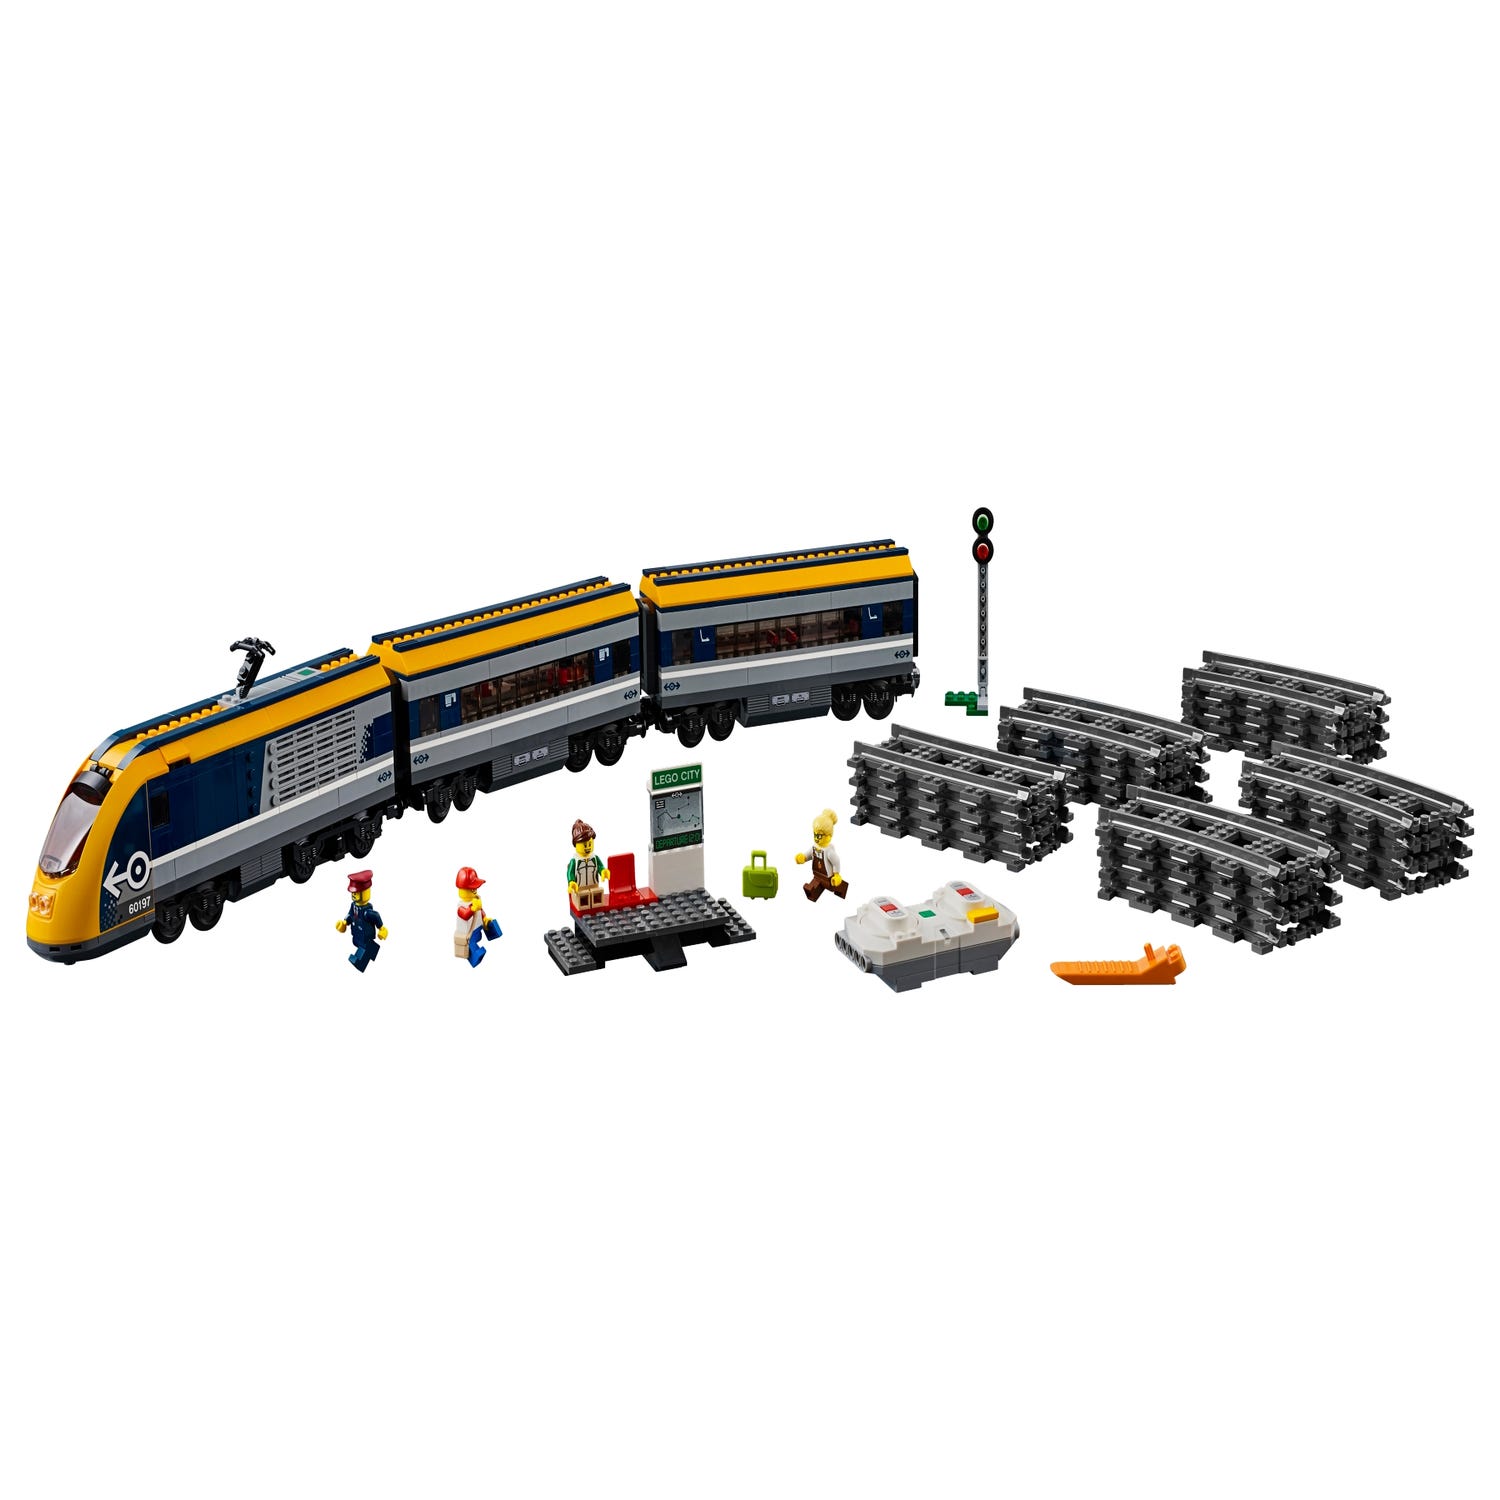 Lionel Green Street interval liv Passenger Train 60197 | City | Buy online at the Official LEGO® Shop US